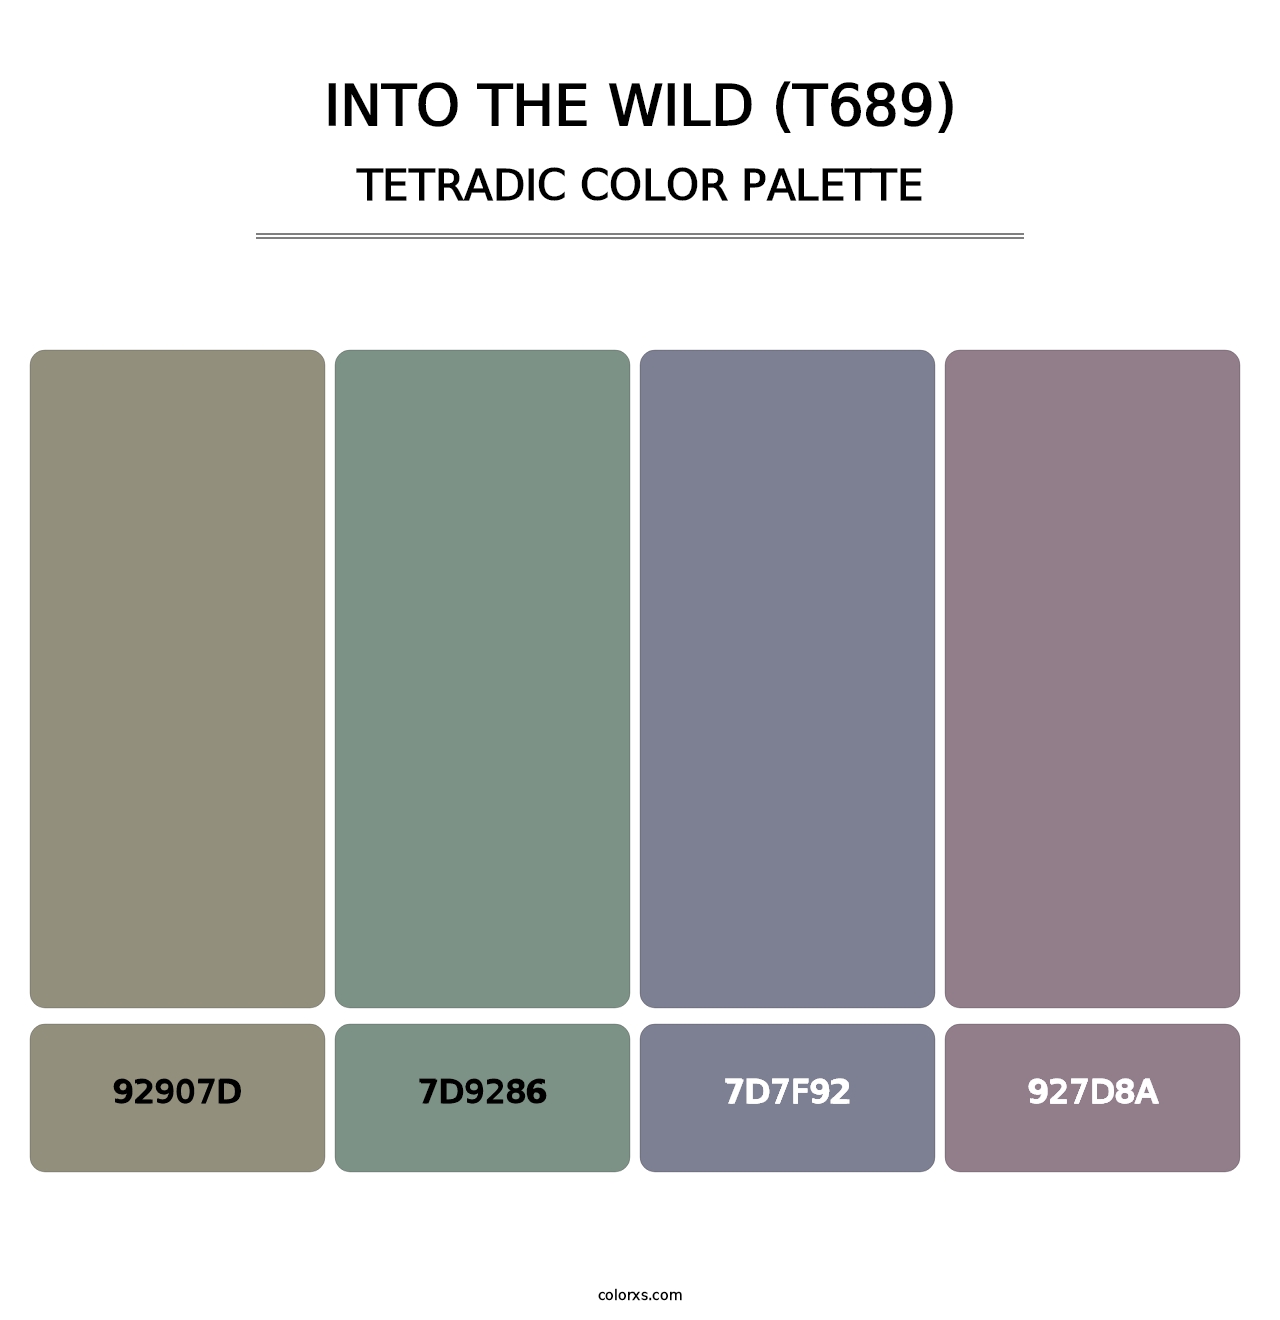 Into the Wild (T689) - Tetradic Color Palette